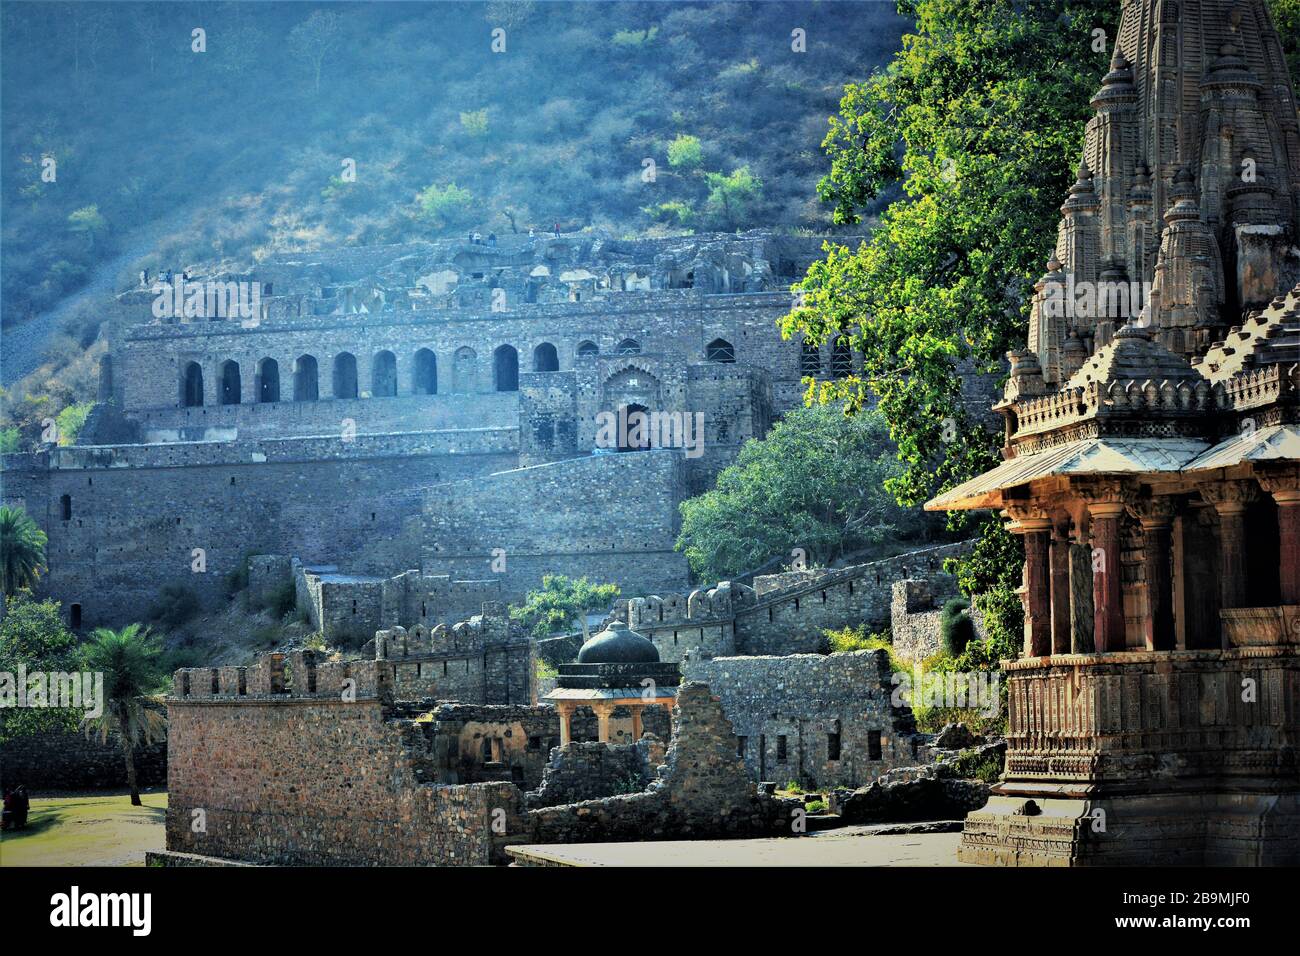 Panoramic view of ruined nahargarh fort with awesome temple at entrance located  in Jaipur, Rajasthan, India Stock Photo